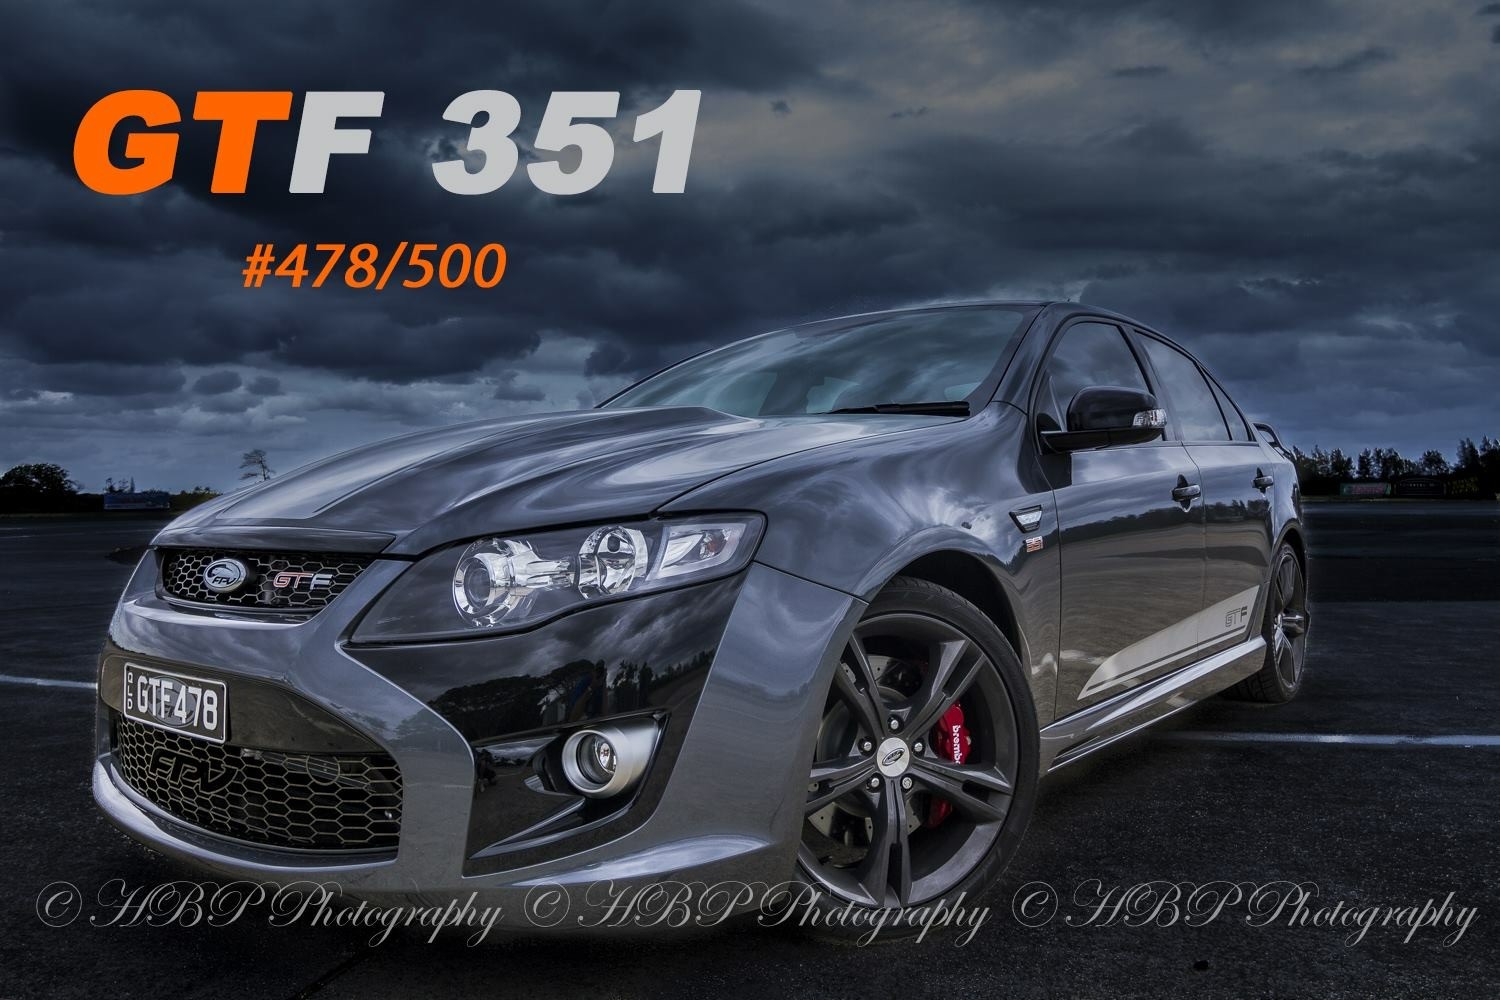 2014 Ford Performance Vehicles GT F 351 Falcon Limited Edition 478/500